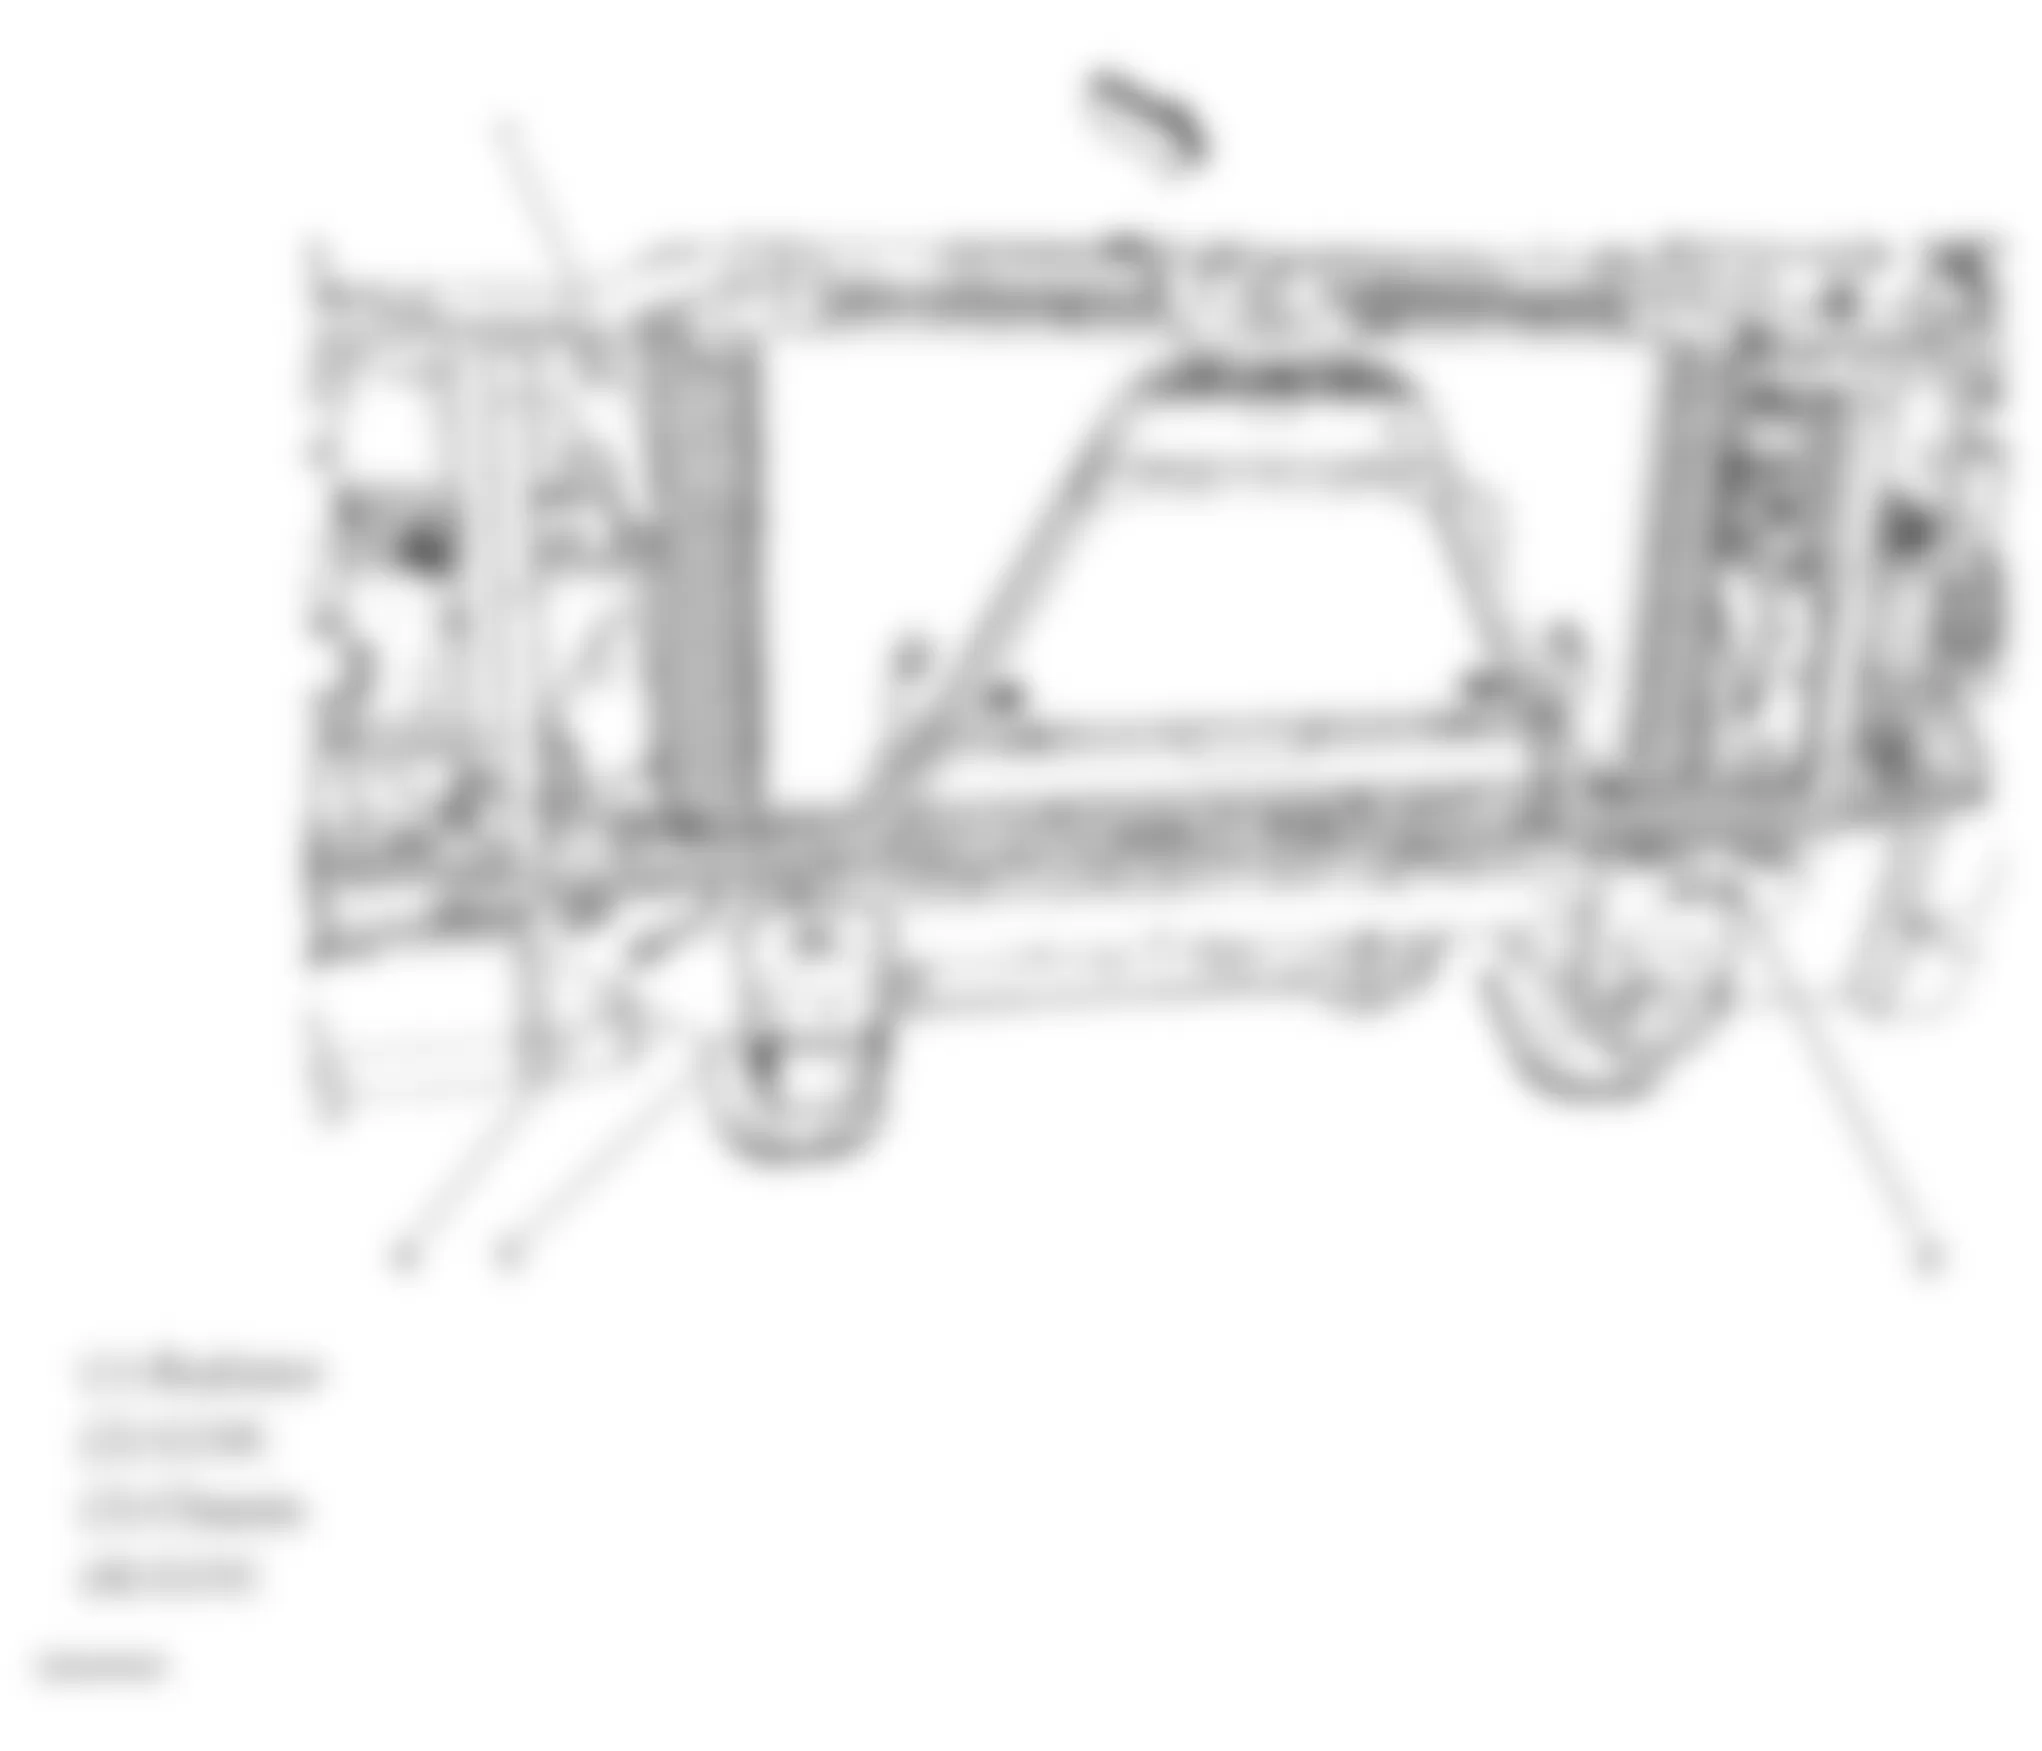 Chevrolet Silverado 1500 2009 - Component Locations -  Front Of Vehicle